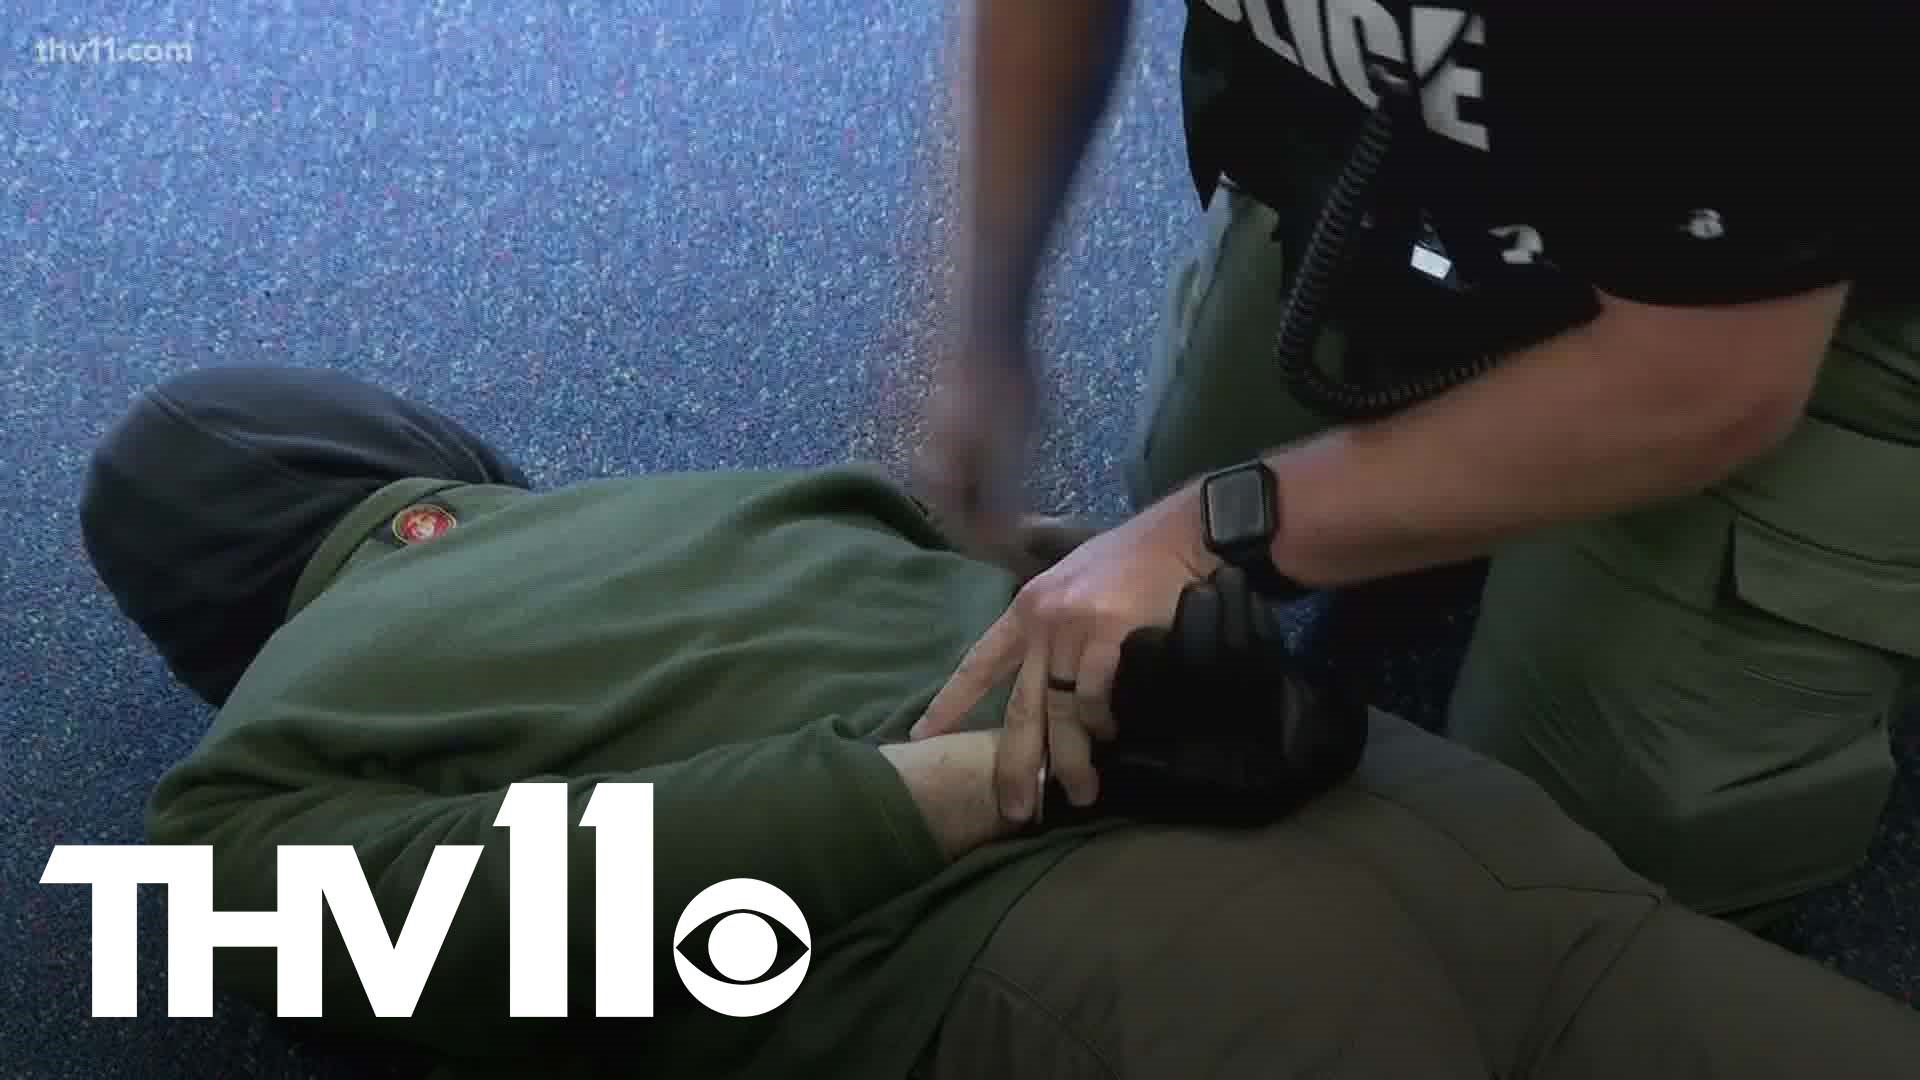 Recent mass shooting have reintroduced the importance of Active Shooter Training. Here's an inside look at how those in Arkansas are getting it done.